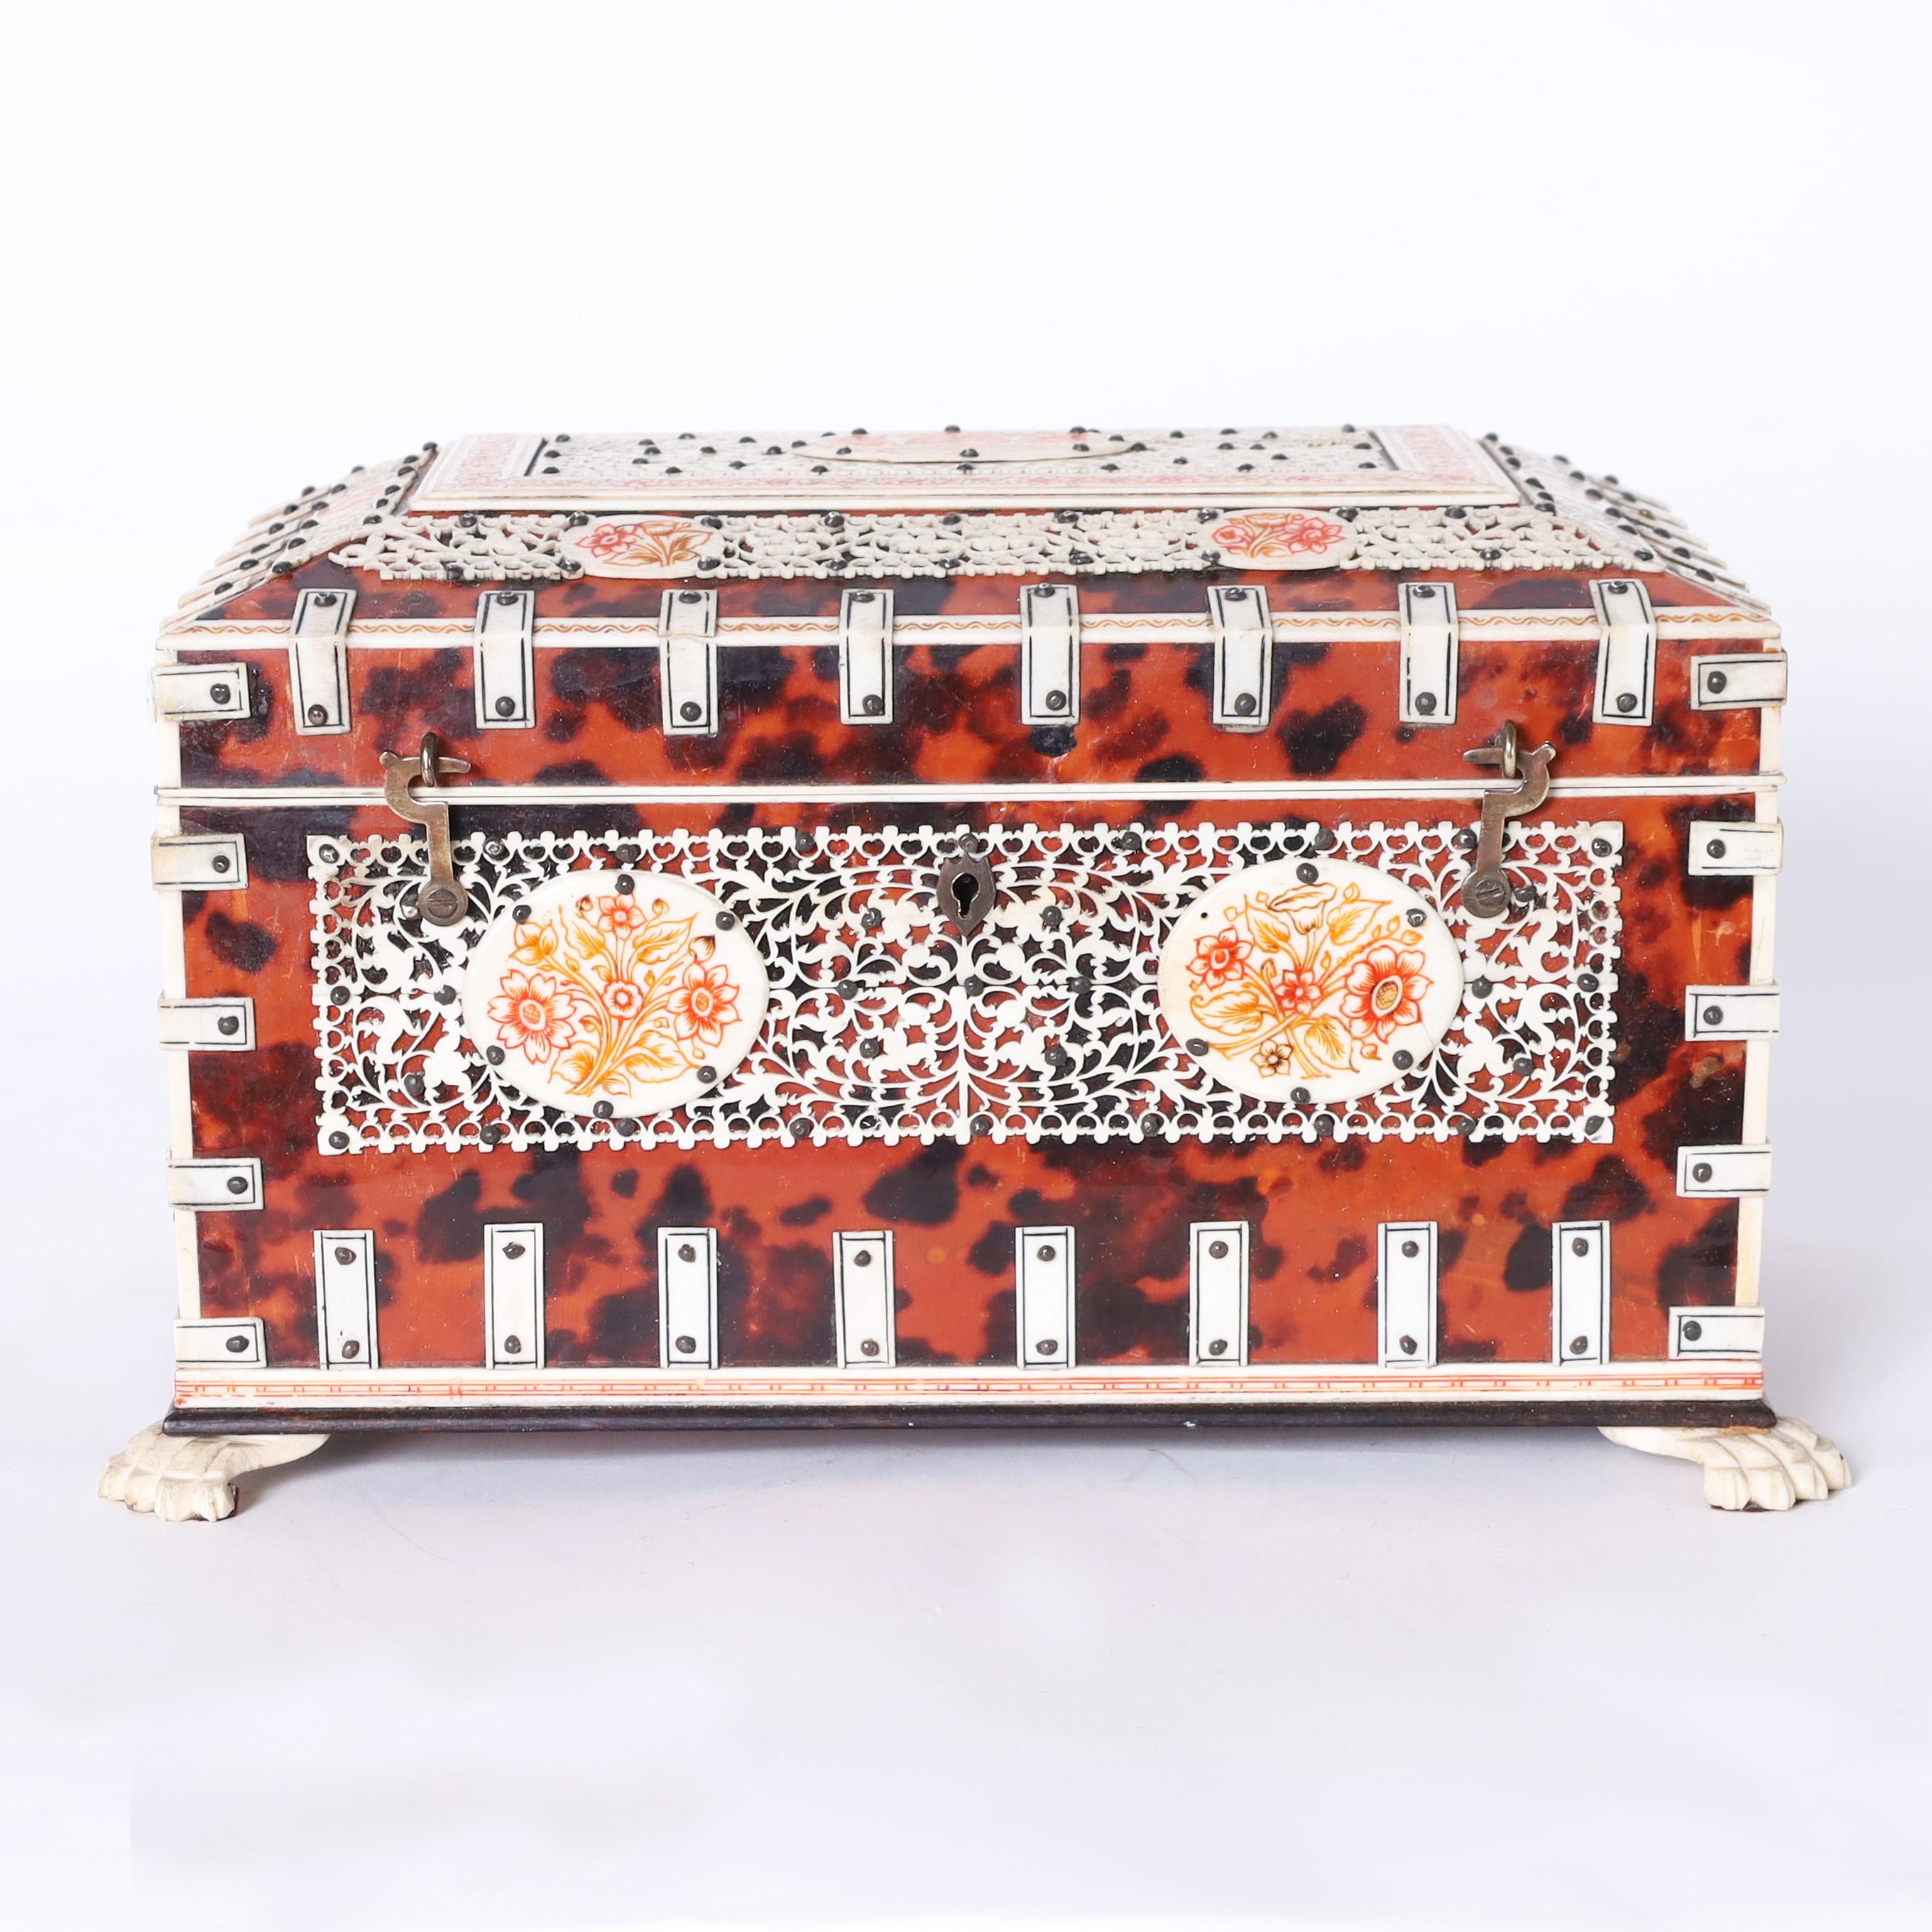 Impressive Anglo Indian box crafted in mahogany and clad in tortoise shell decorated with bone straps, carved and painted floral panels, and paw feet. The inside has a mirror and bone decorated removable compartments.